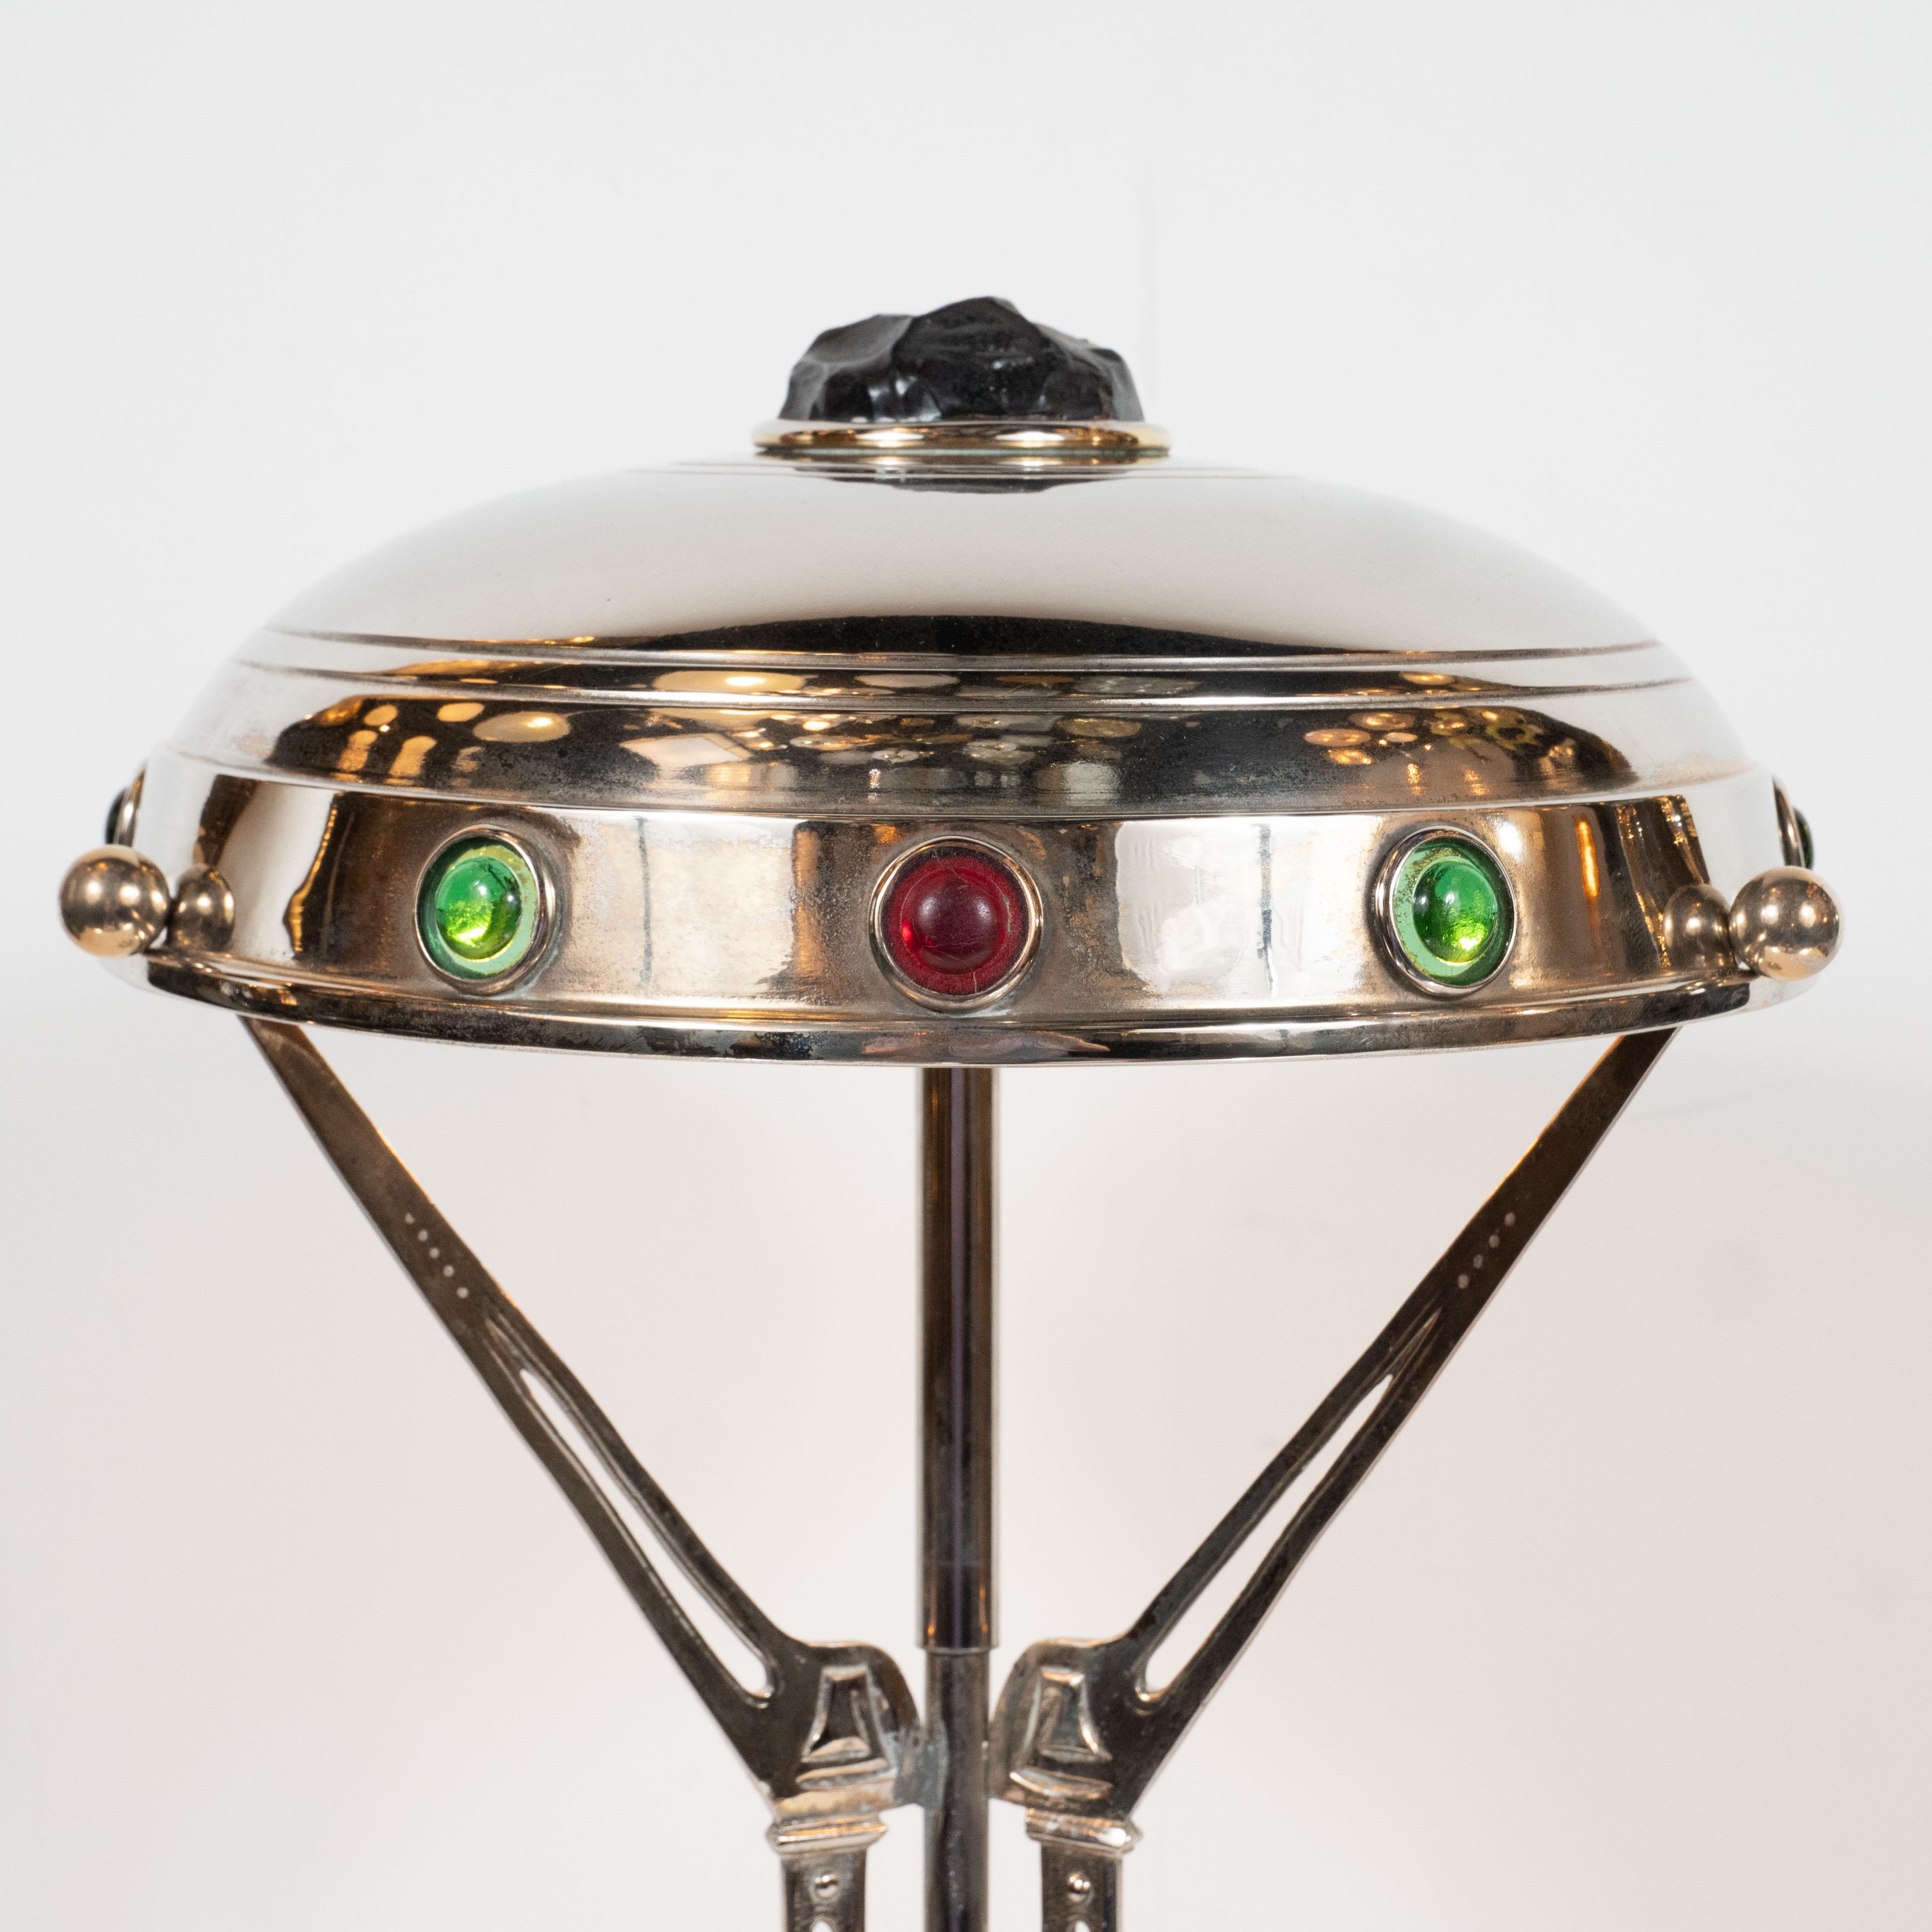 Early 20th Century Art Deco Nickel Table Lamp with Sculptural Supports w/ Jewel Tone Glass Accents